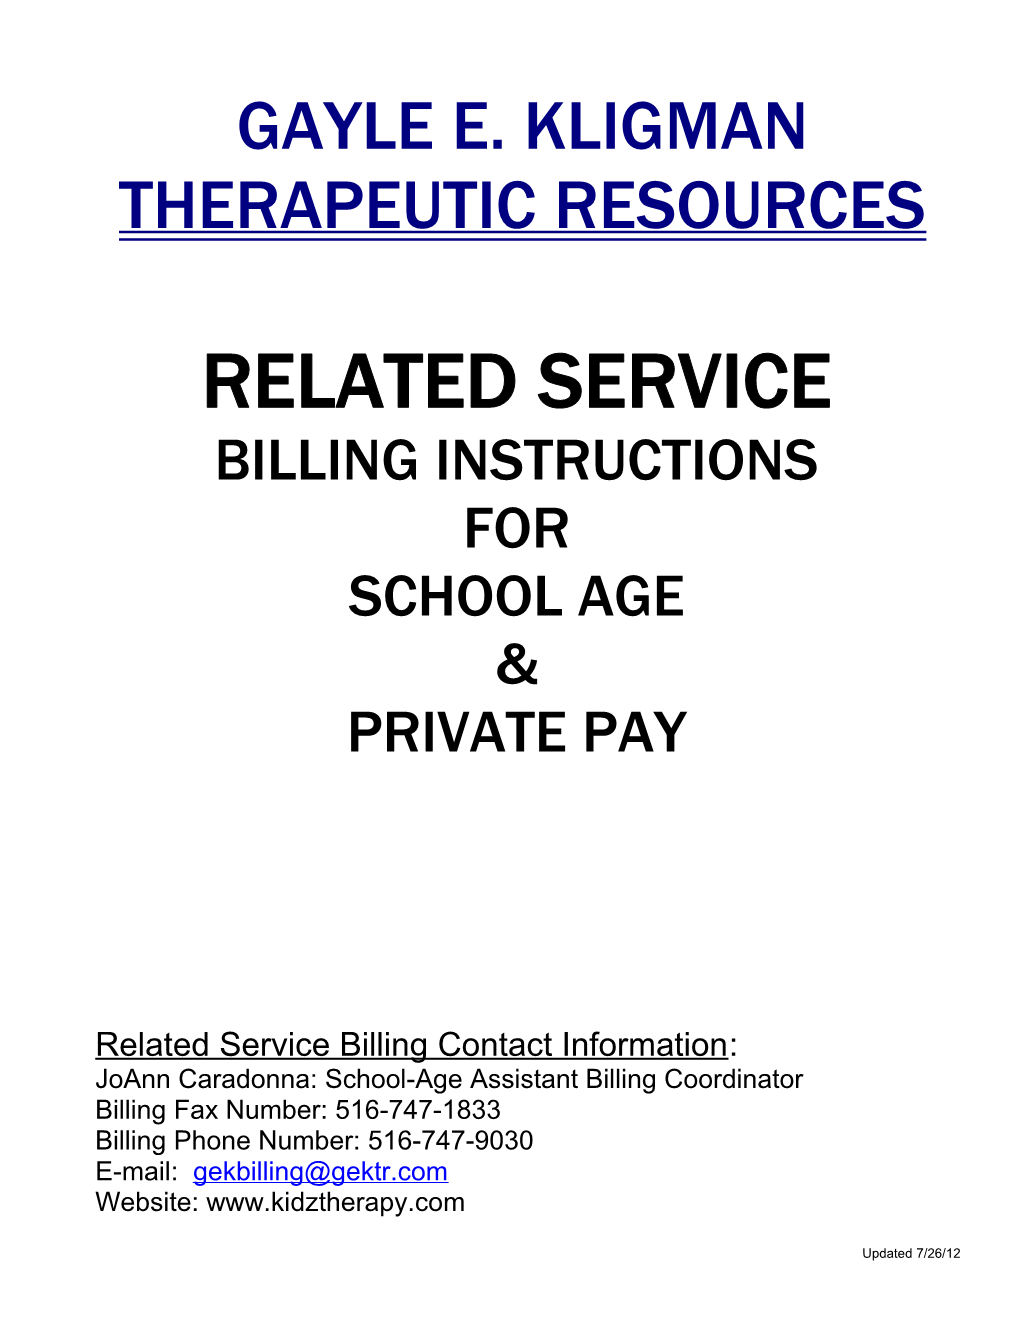 Gayle E. Kligman Therapeutic Resources